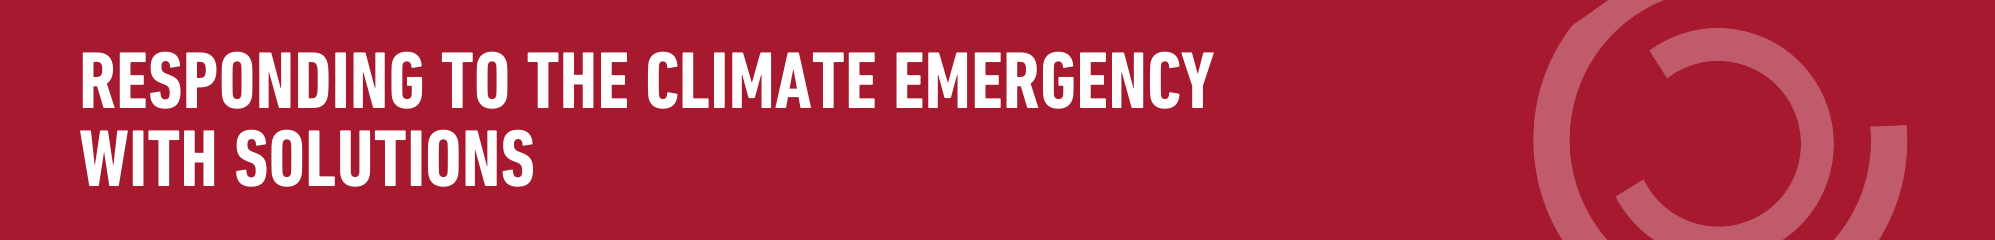 Red background with circle motif and text "Responding to the climate emergency with solutions"